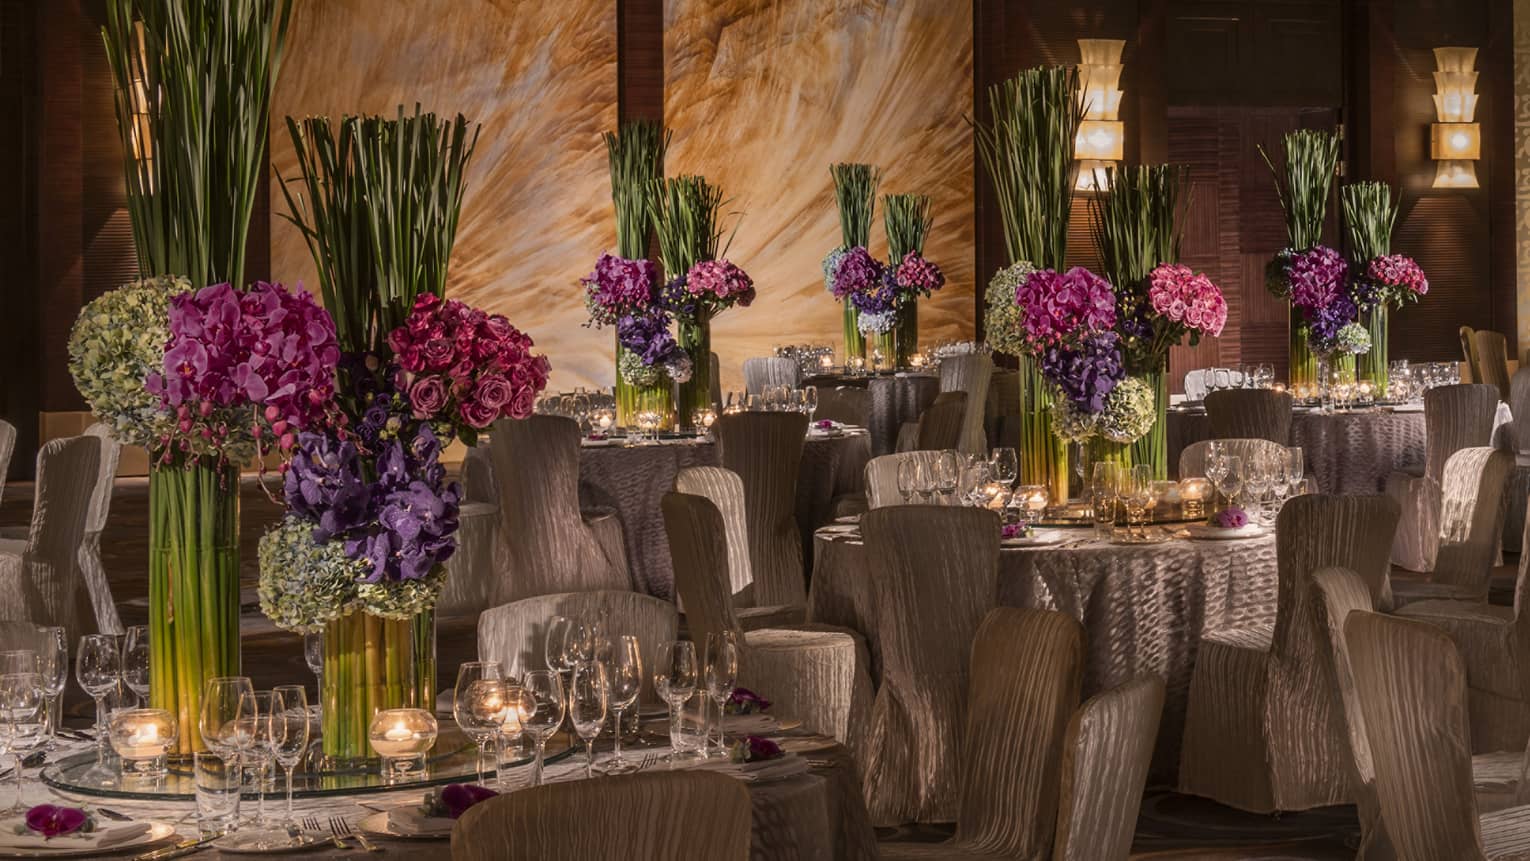 Elegant wedding reception, tables with large purple and green floral arrangements and glowing candles